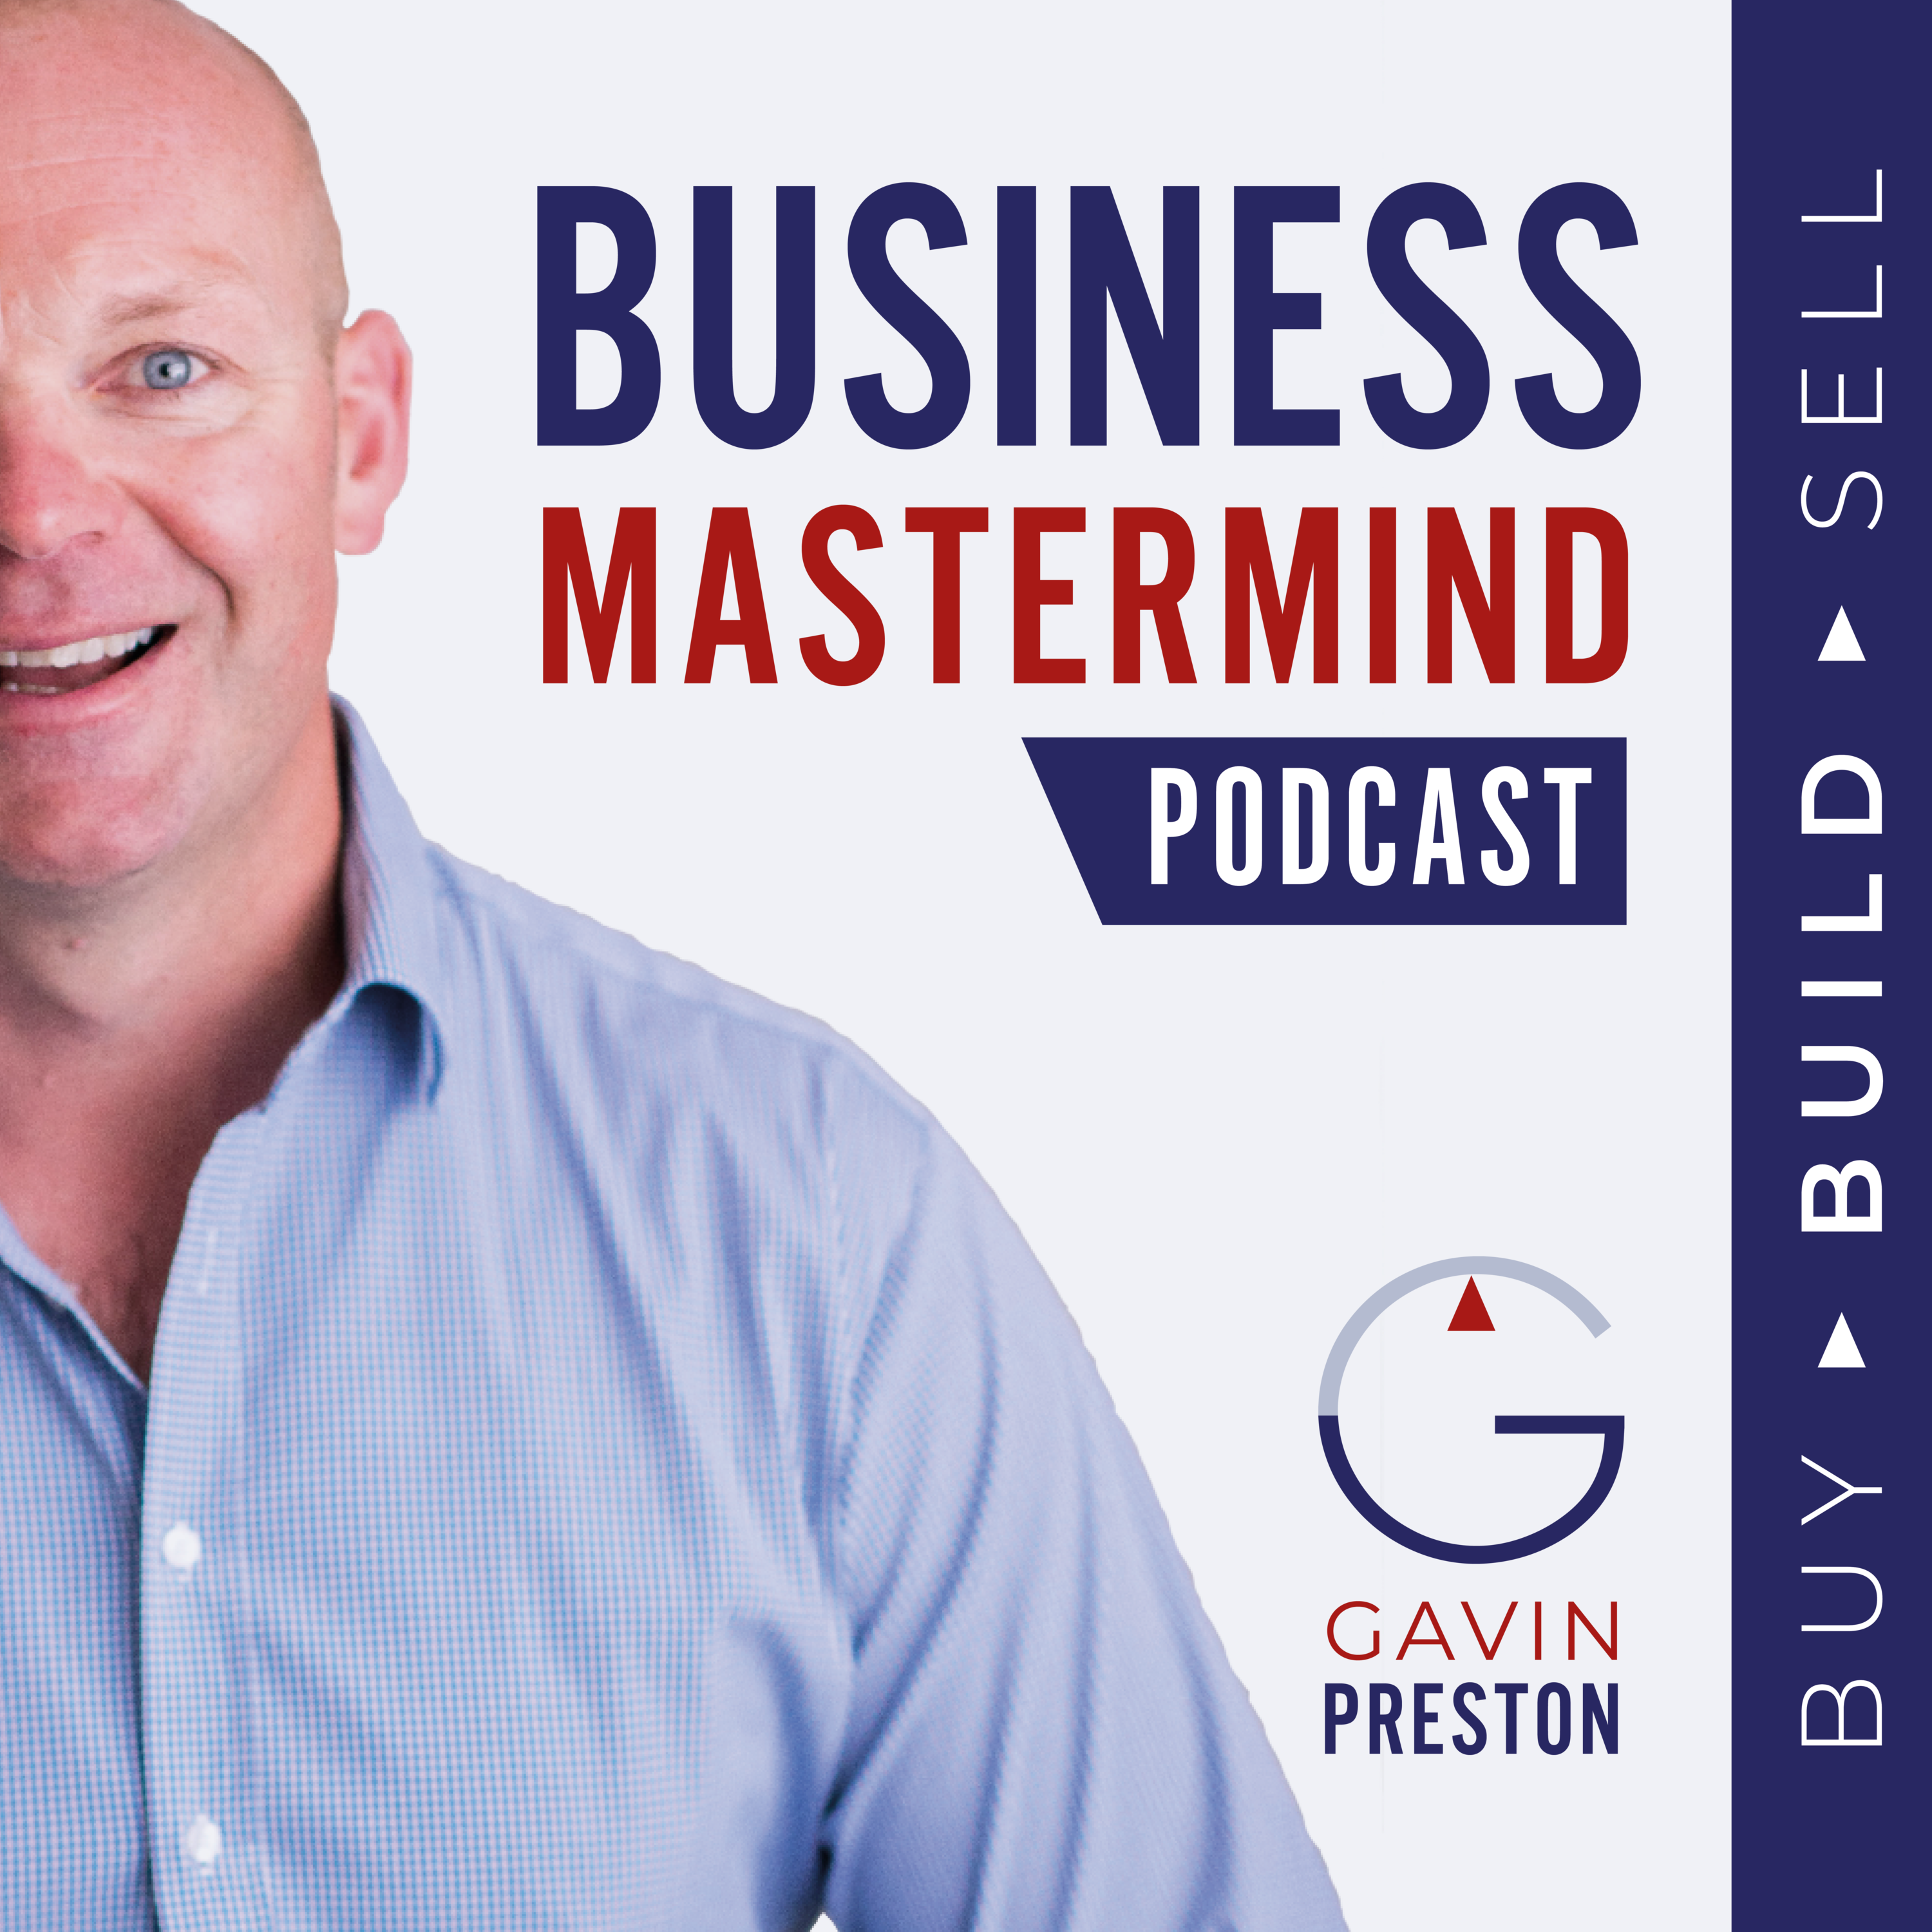 Scale Your Business By Harnessing The Power Of Marketing - with Kevin Urrutia